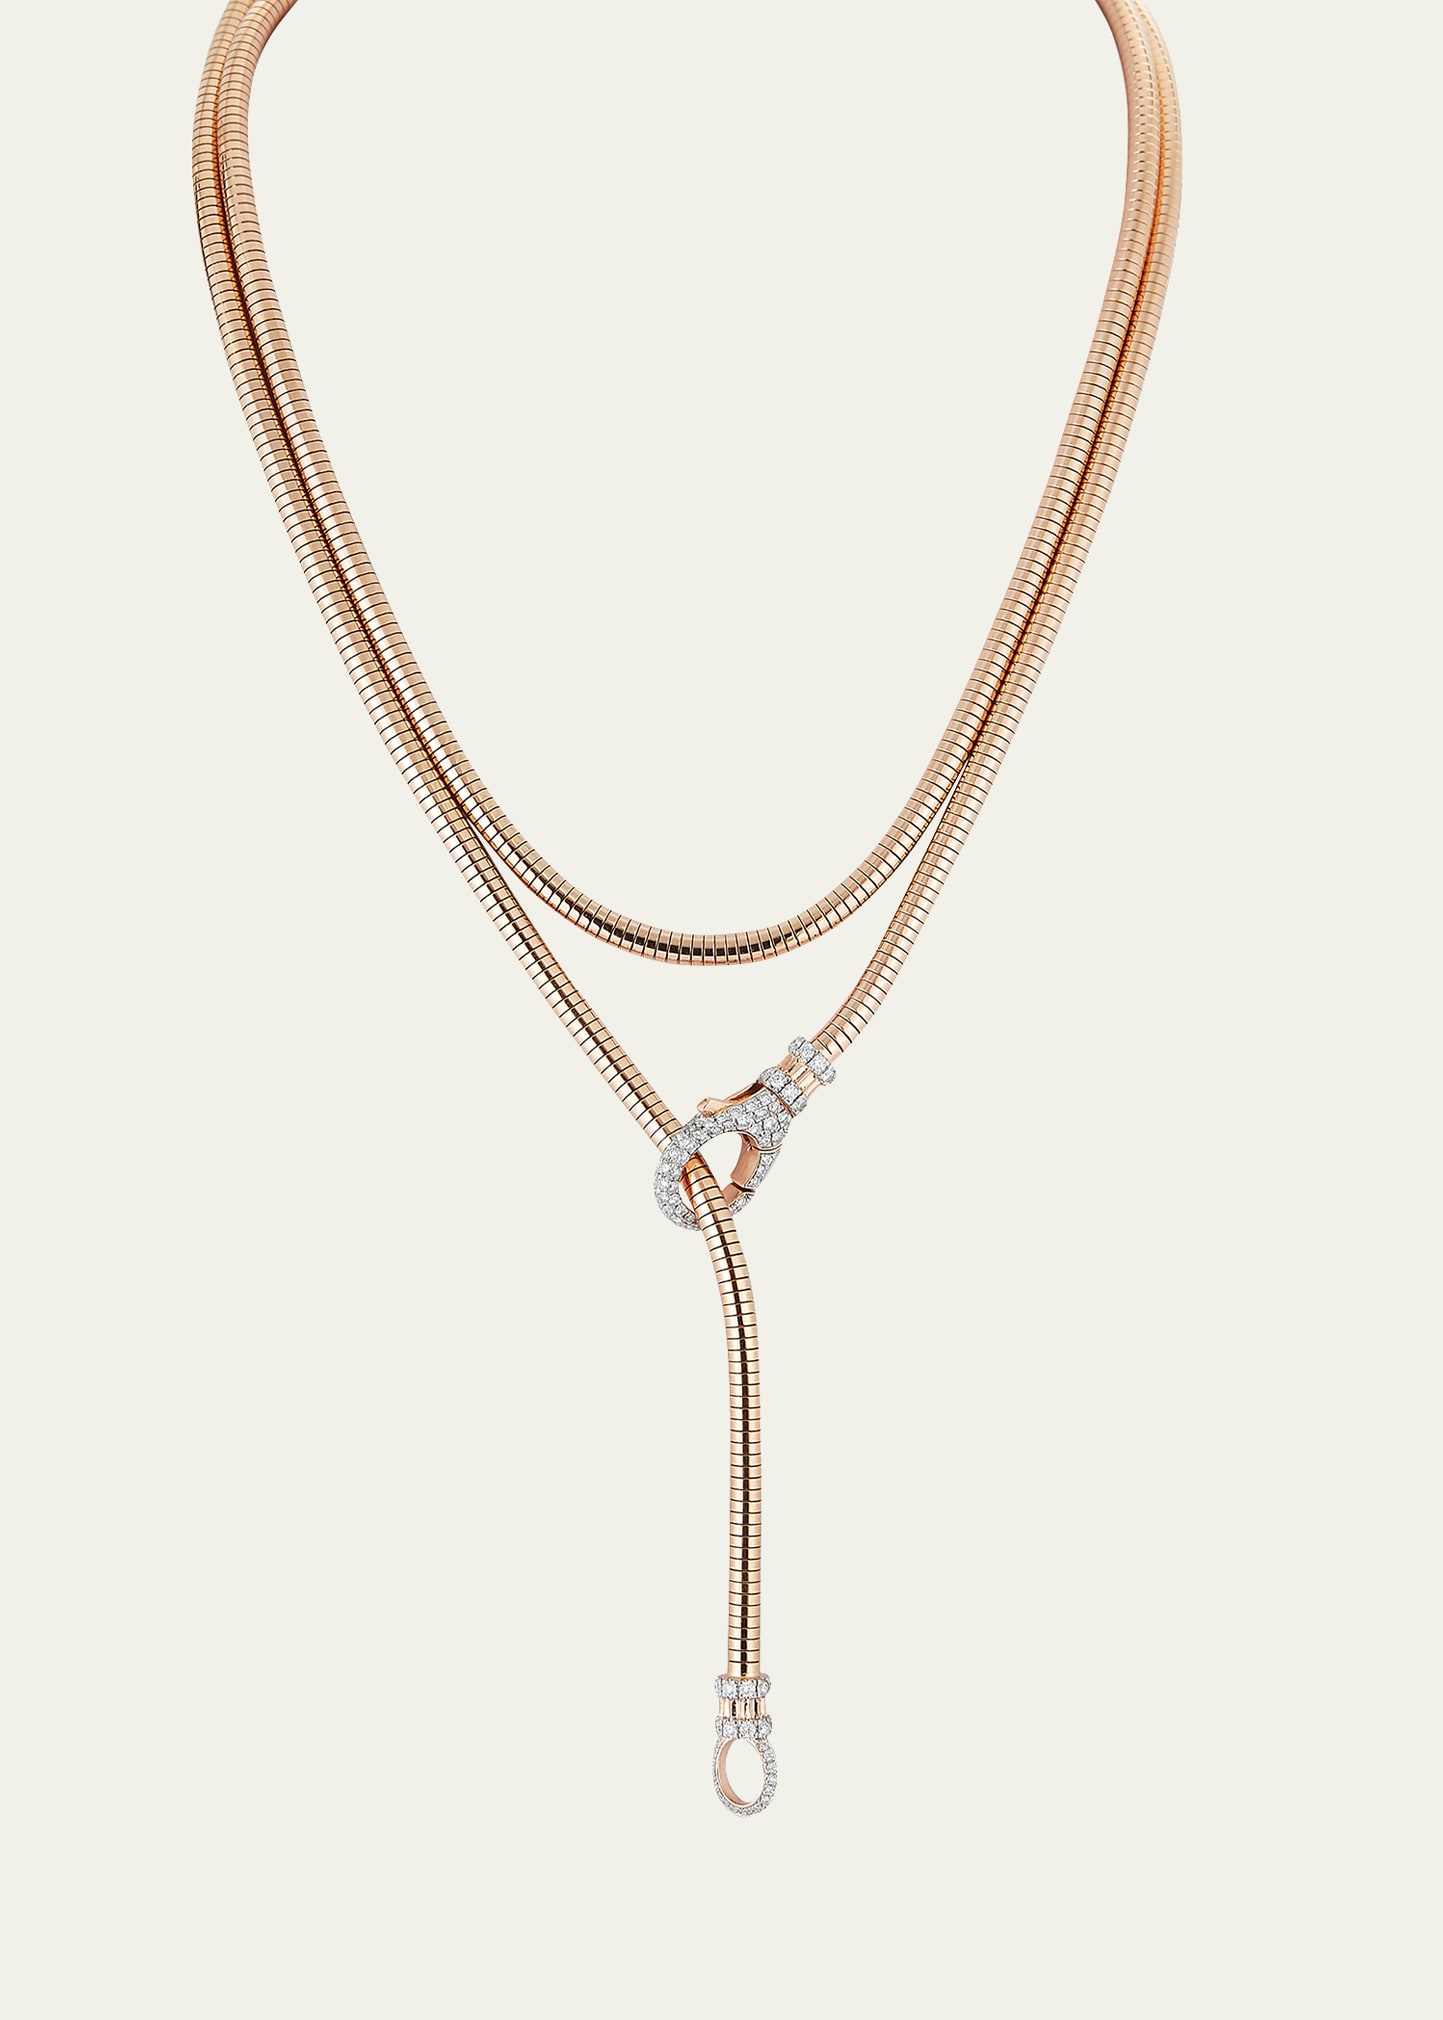 Clive 18K Rose Gold All Diamond Chain Wrap Necklace